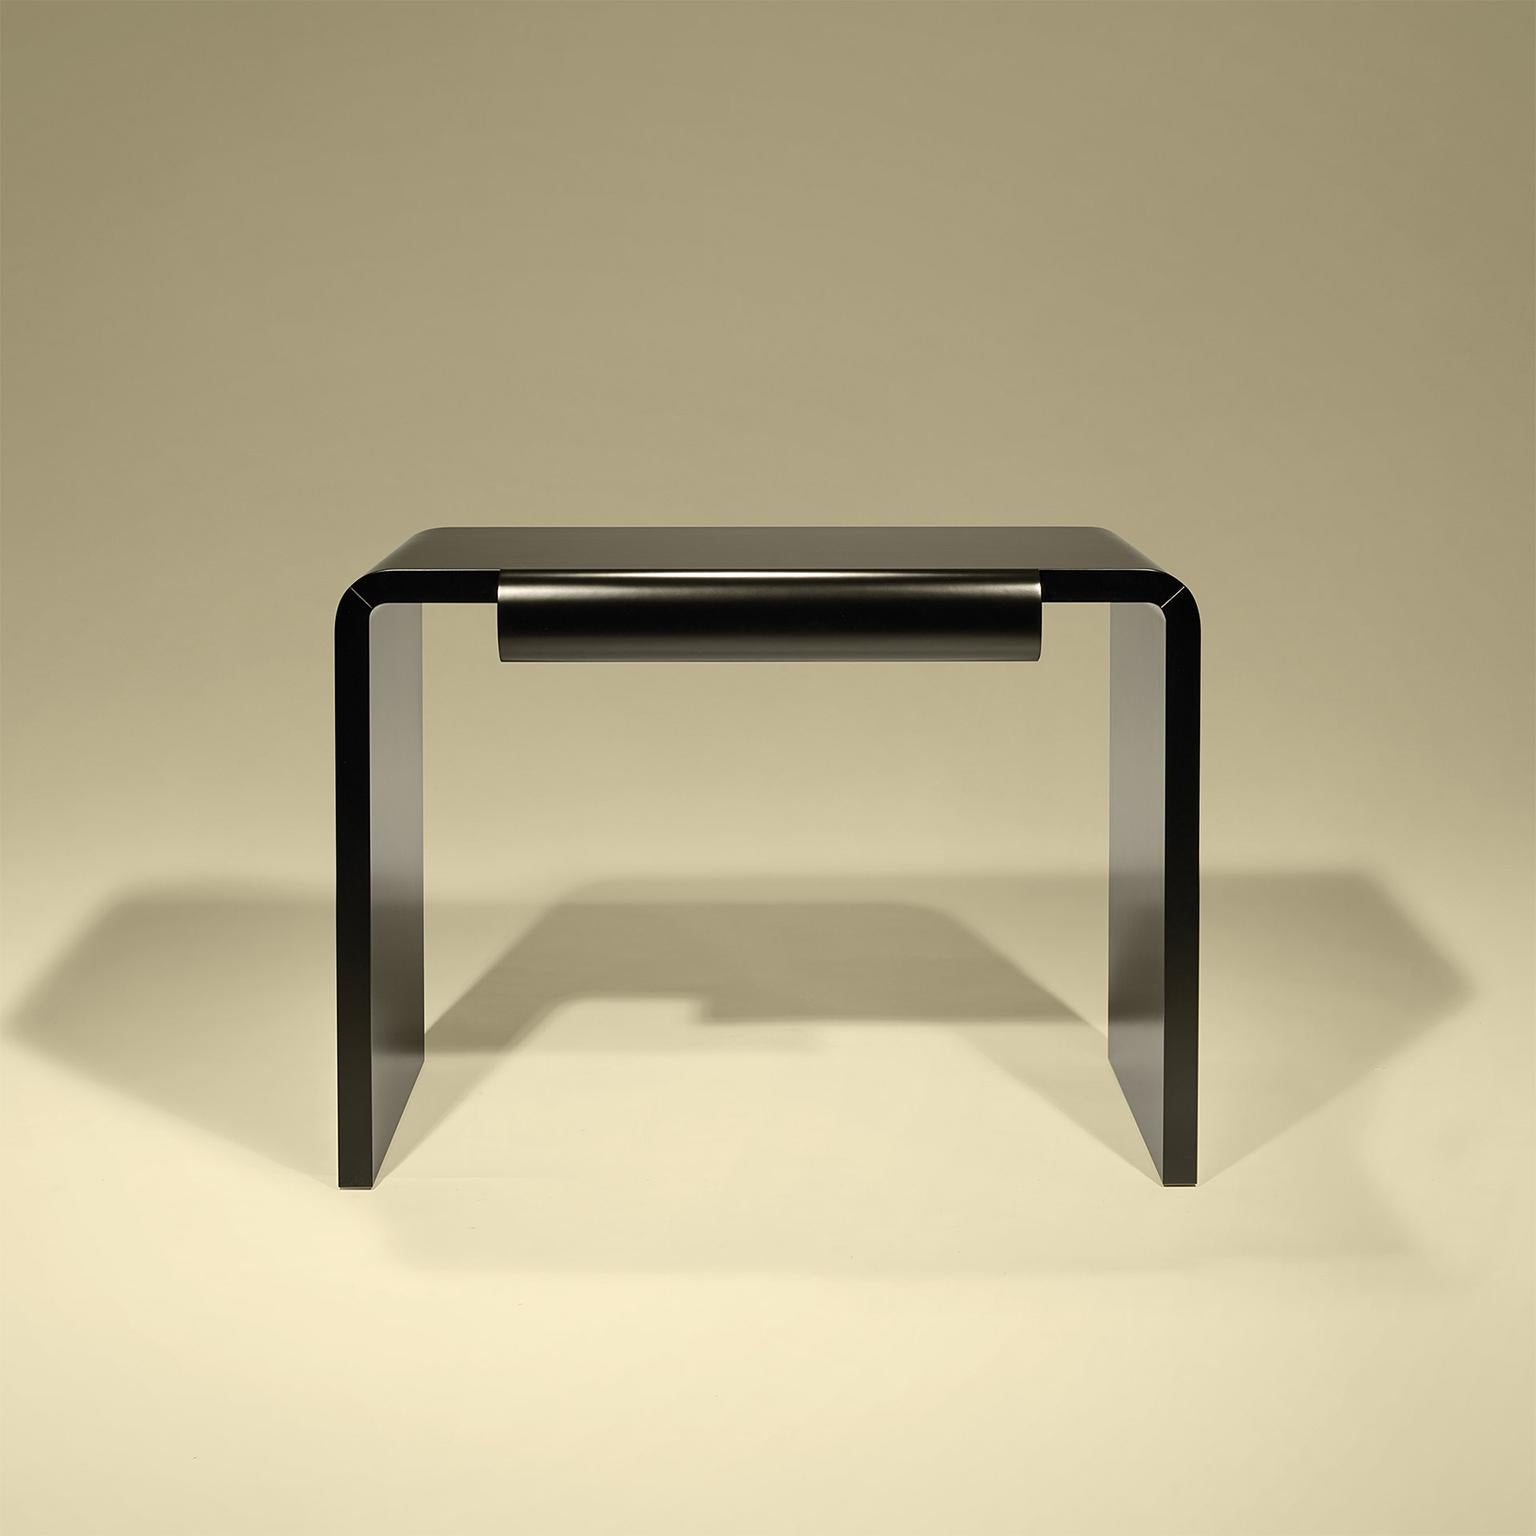 Desk in black lacquer with one drawer and grey Partridge eye finish.

Bespoke / customizable
Identical shapes with different sizes and finishings.
All RAL colors available. (Mate / half gloss / gloss).